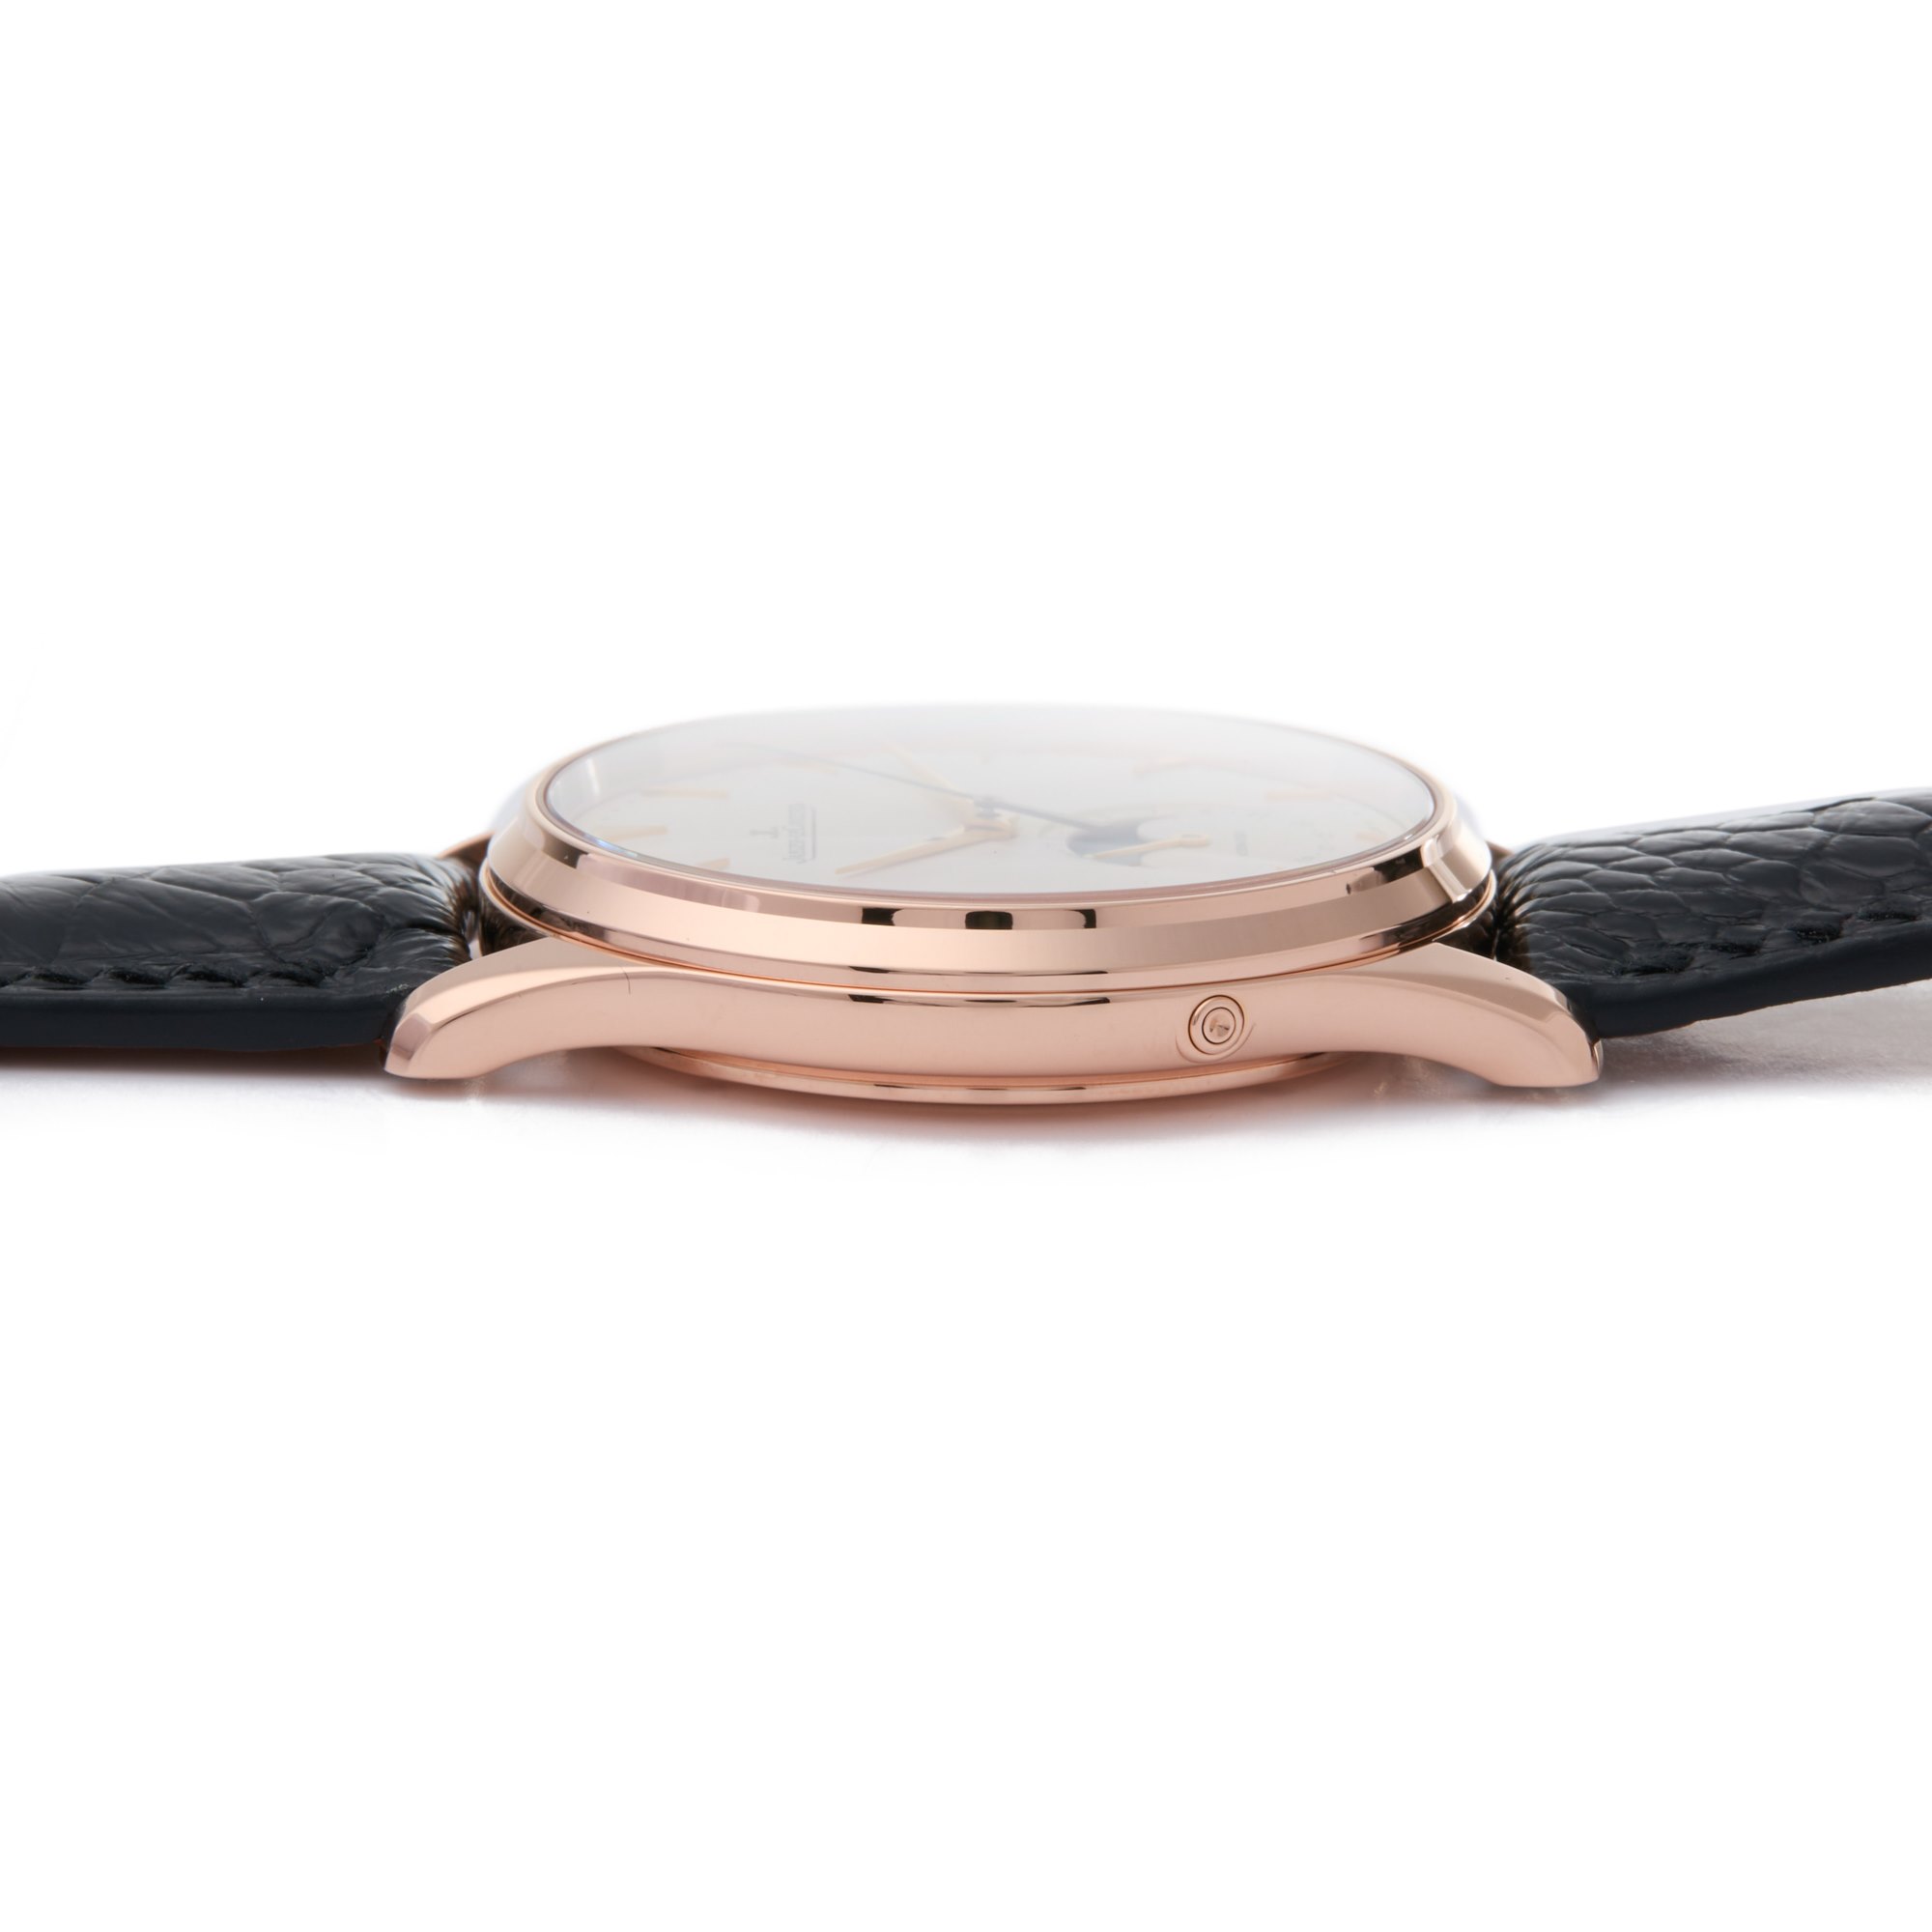 Jaeger-LeCoultre Master Ultra Thin Moonphase Rose Gold Q1362520